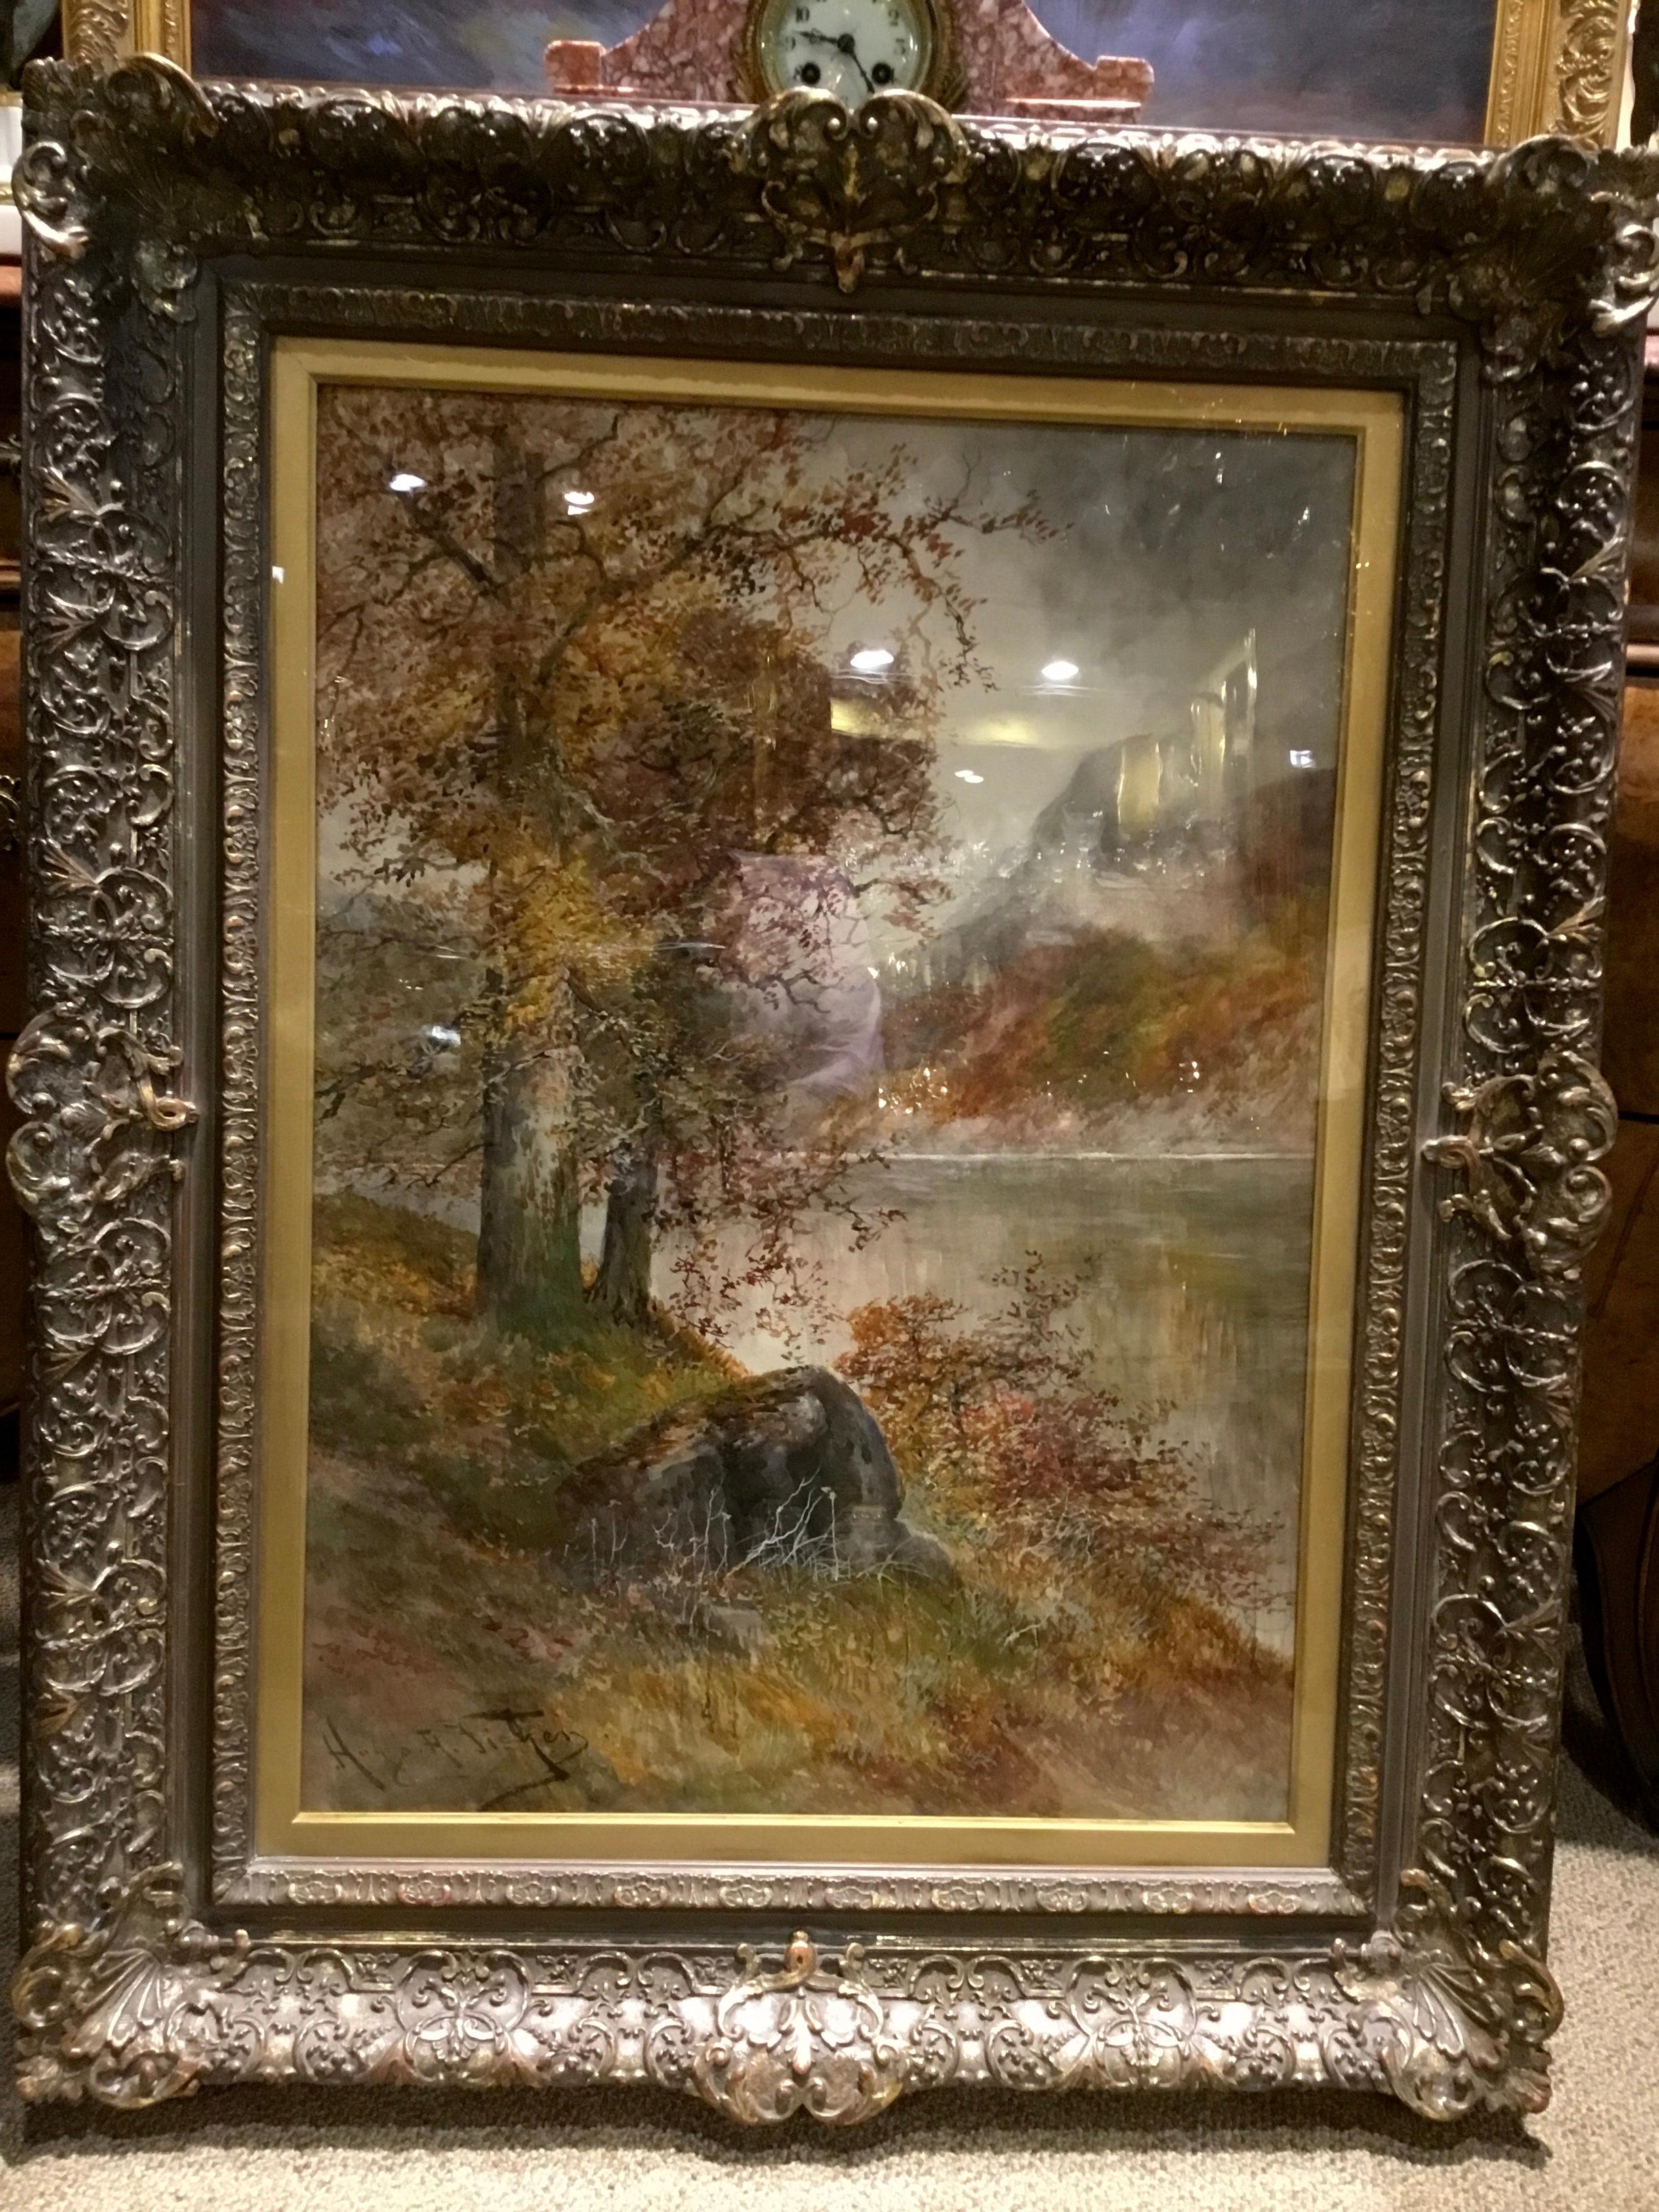 19th Century Watercolor Landscape Painting in Antique Frame by Hugo A. Fisher 1854-1916